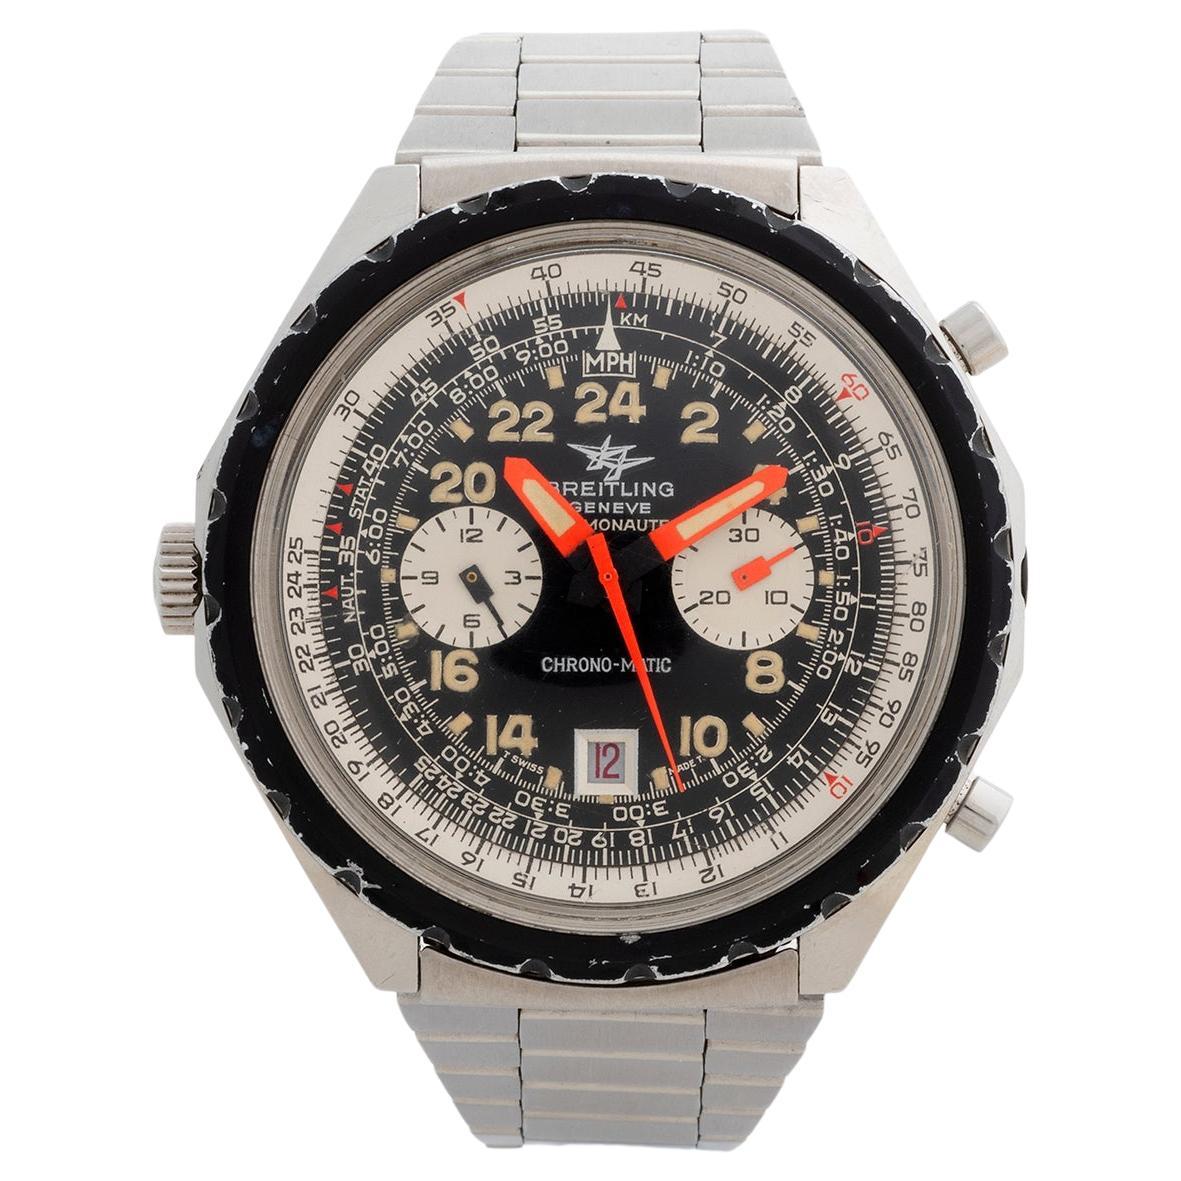 Breitling Cosmonaute Chrono-matic Wristwatch 1809, Call 11, 48mm Case. c1970. For Sale